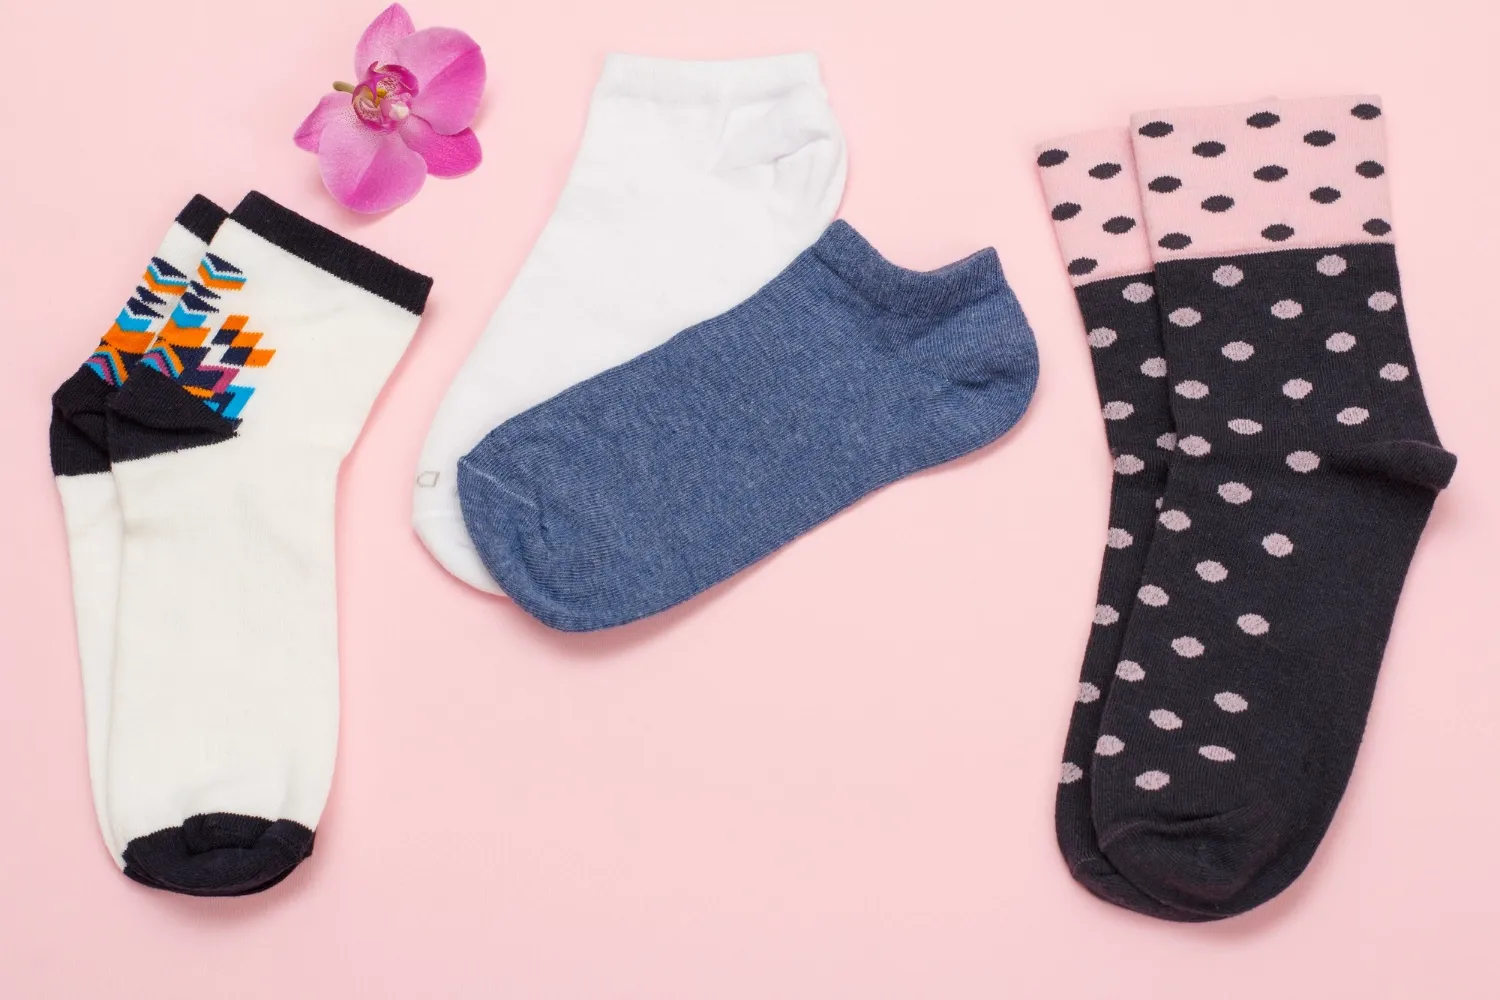 Color pairs of women socks and orchid flower on pink background, top view.